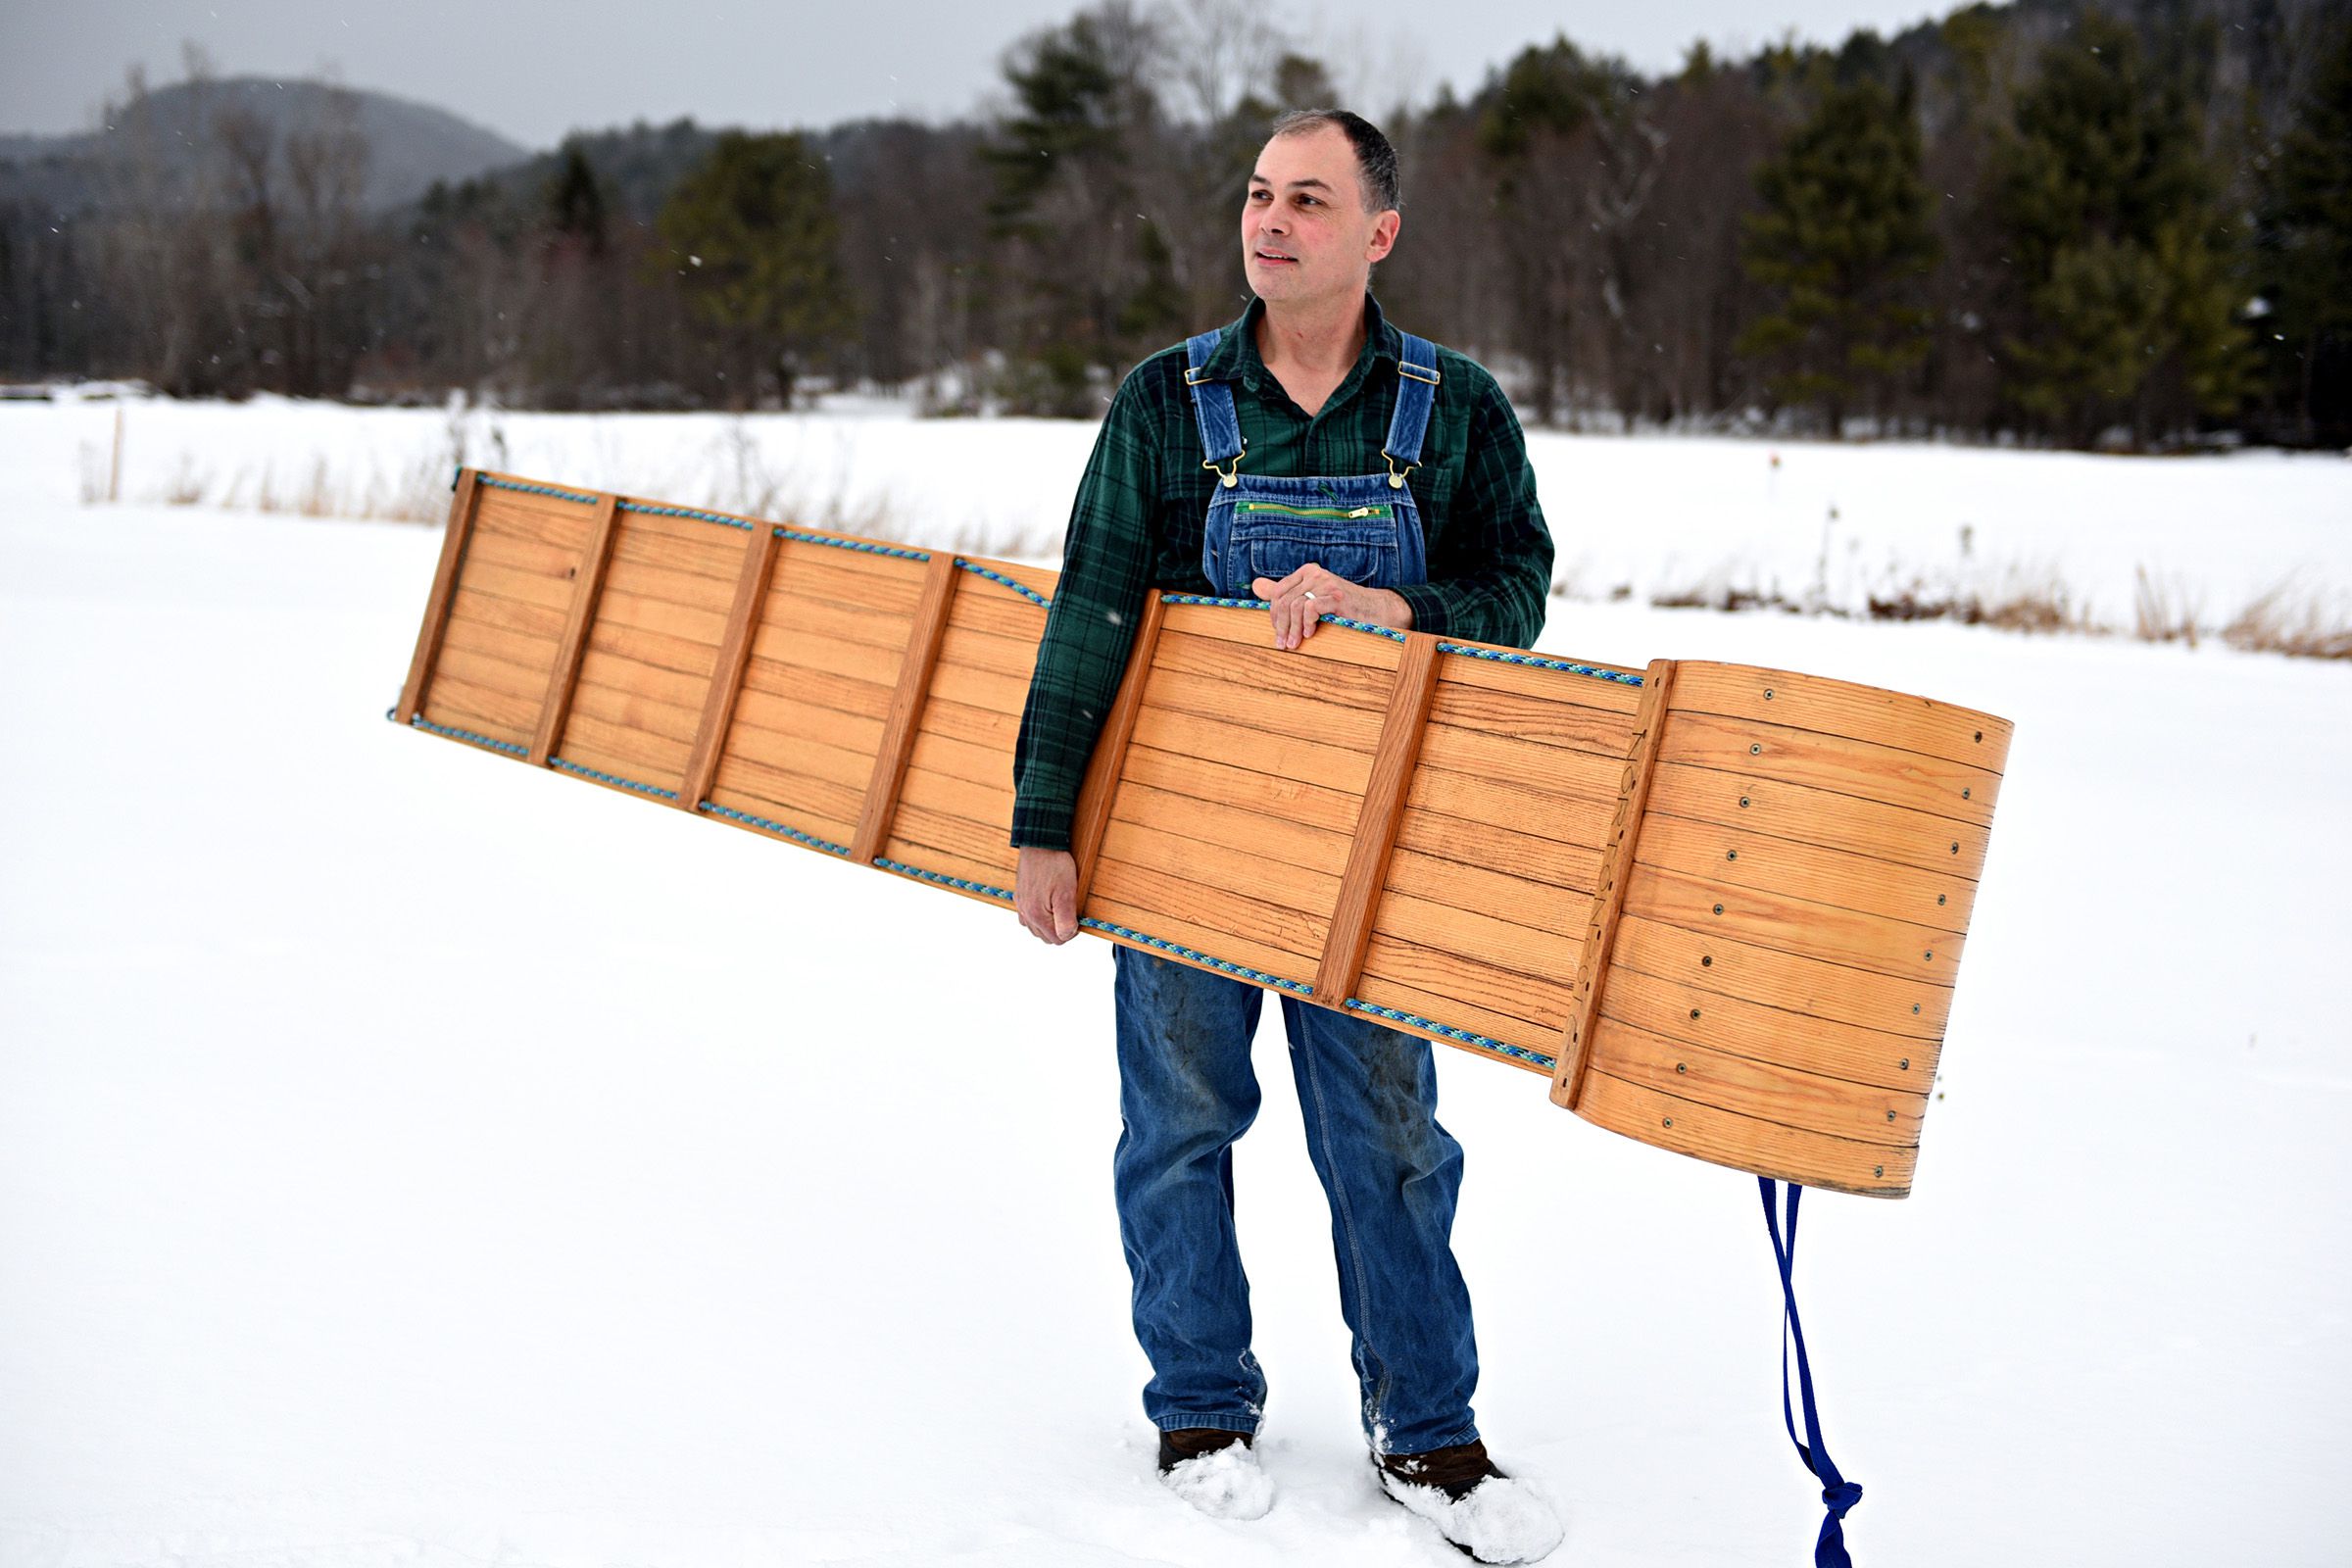 Glen Norton of Norton's Vermont Toboggans stands behind his home in West Fairlee, Vt., on Wednesday, Jan. 8, 2019. Norton started making toboggans with his father in 2011. (Valley News - Jennifer Hauck) Copyright Valley News. May not be reprinted or used online without permission. Send requests to permission@vnews.com.